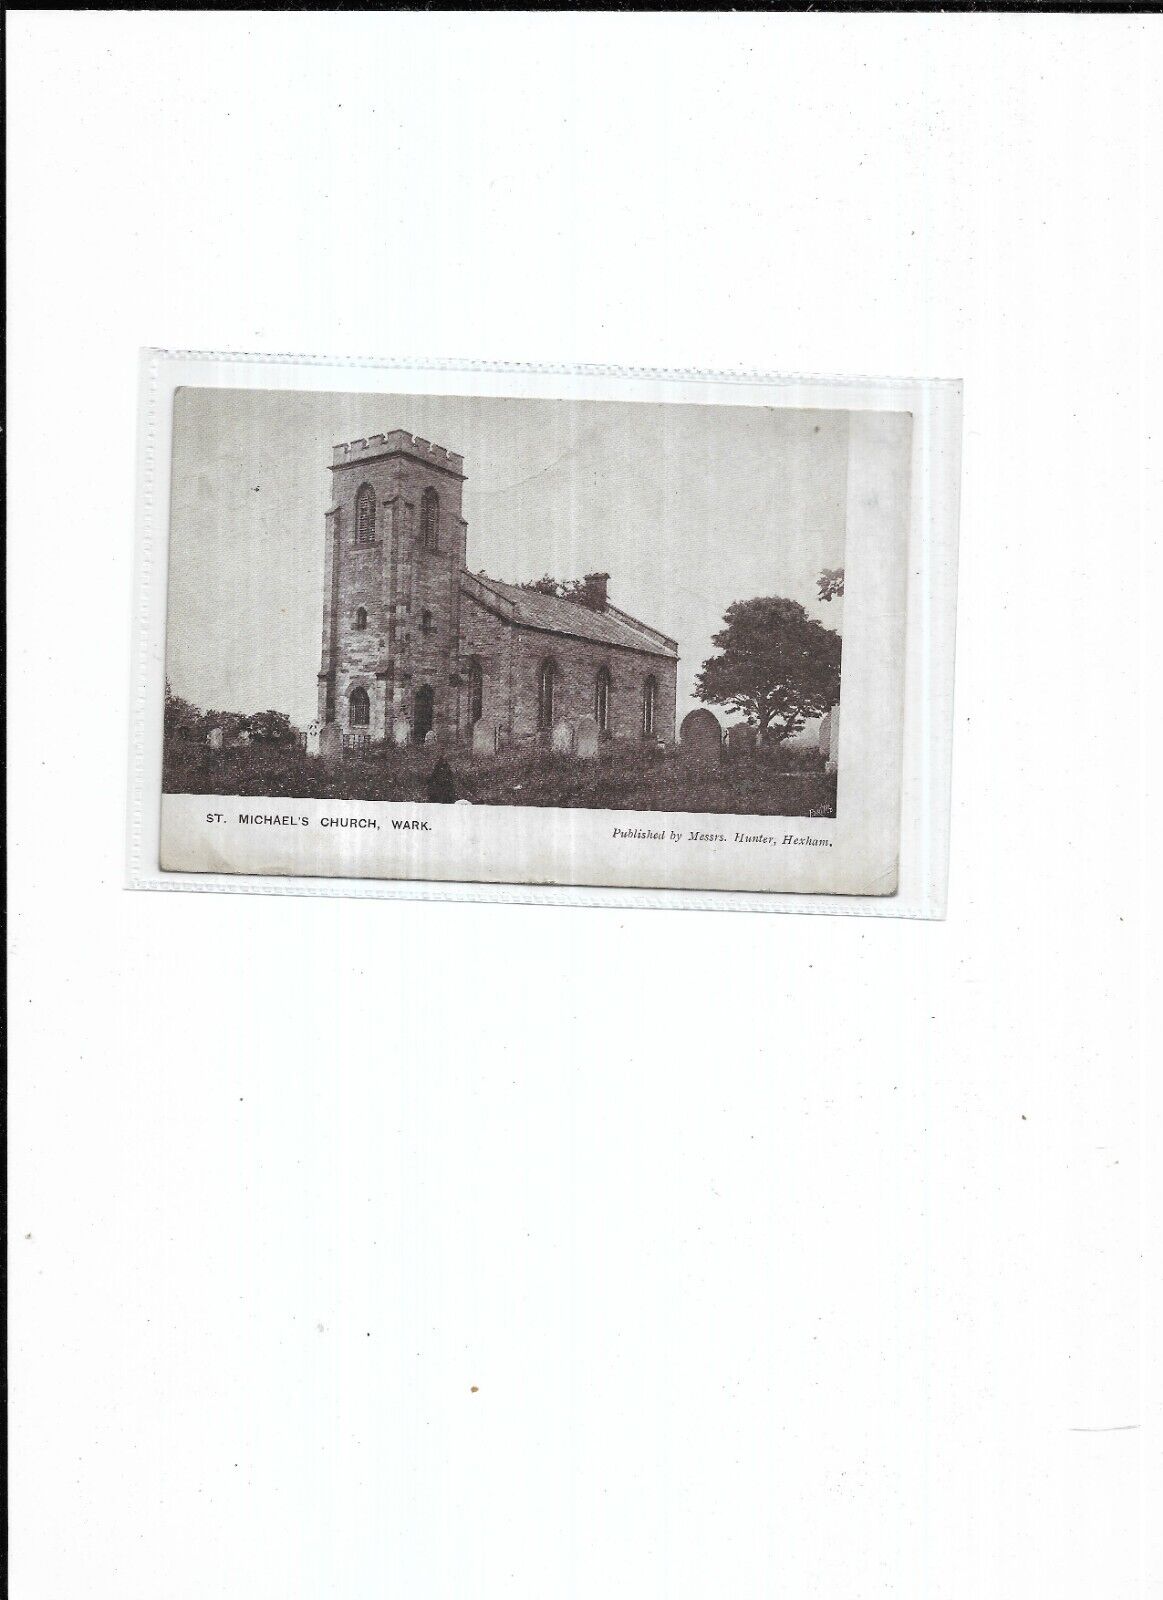 House Clearance - Northumberland Service "St Michael's Church, Wark" POstmarked 1910